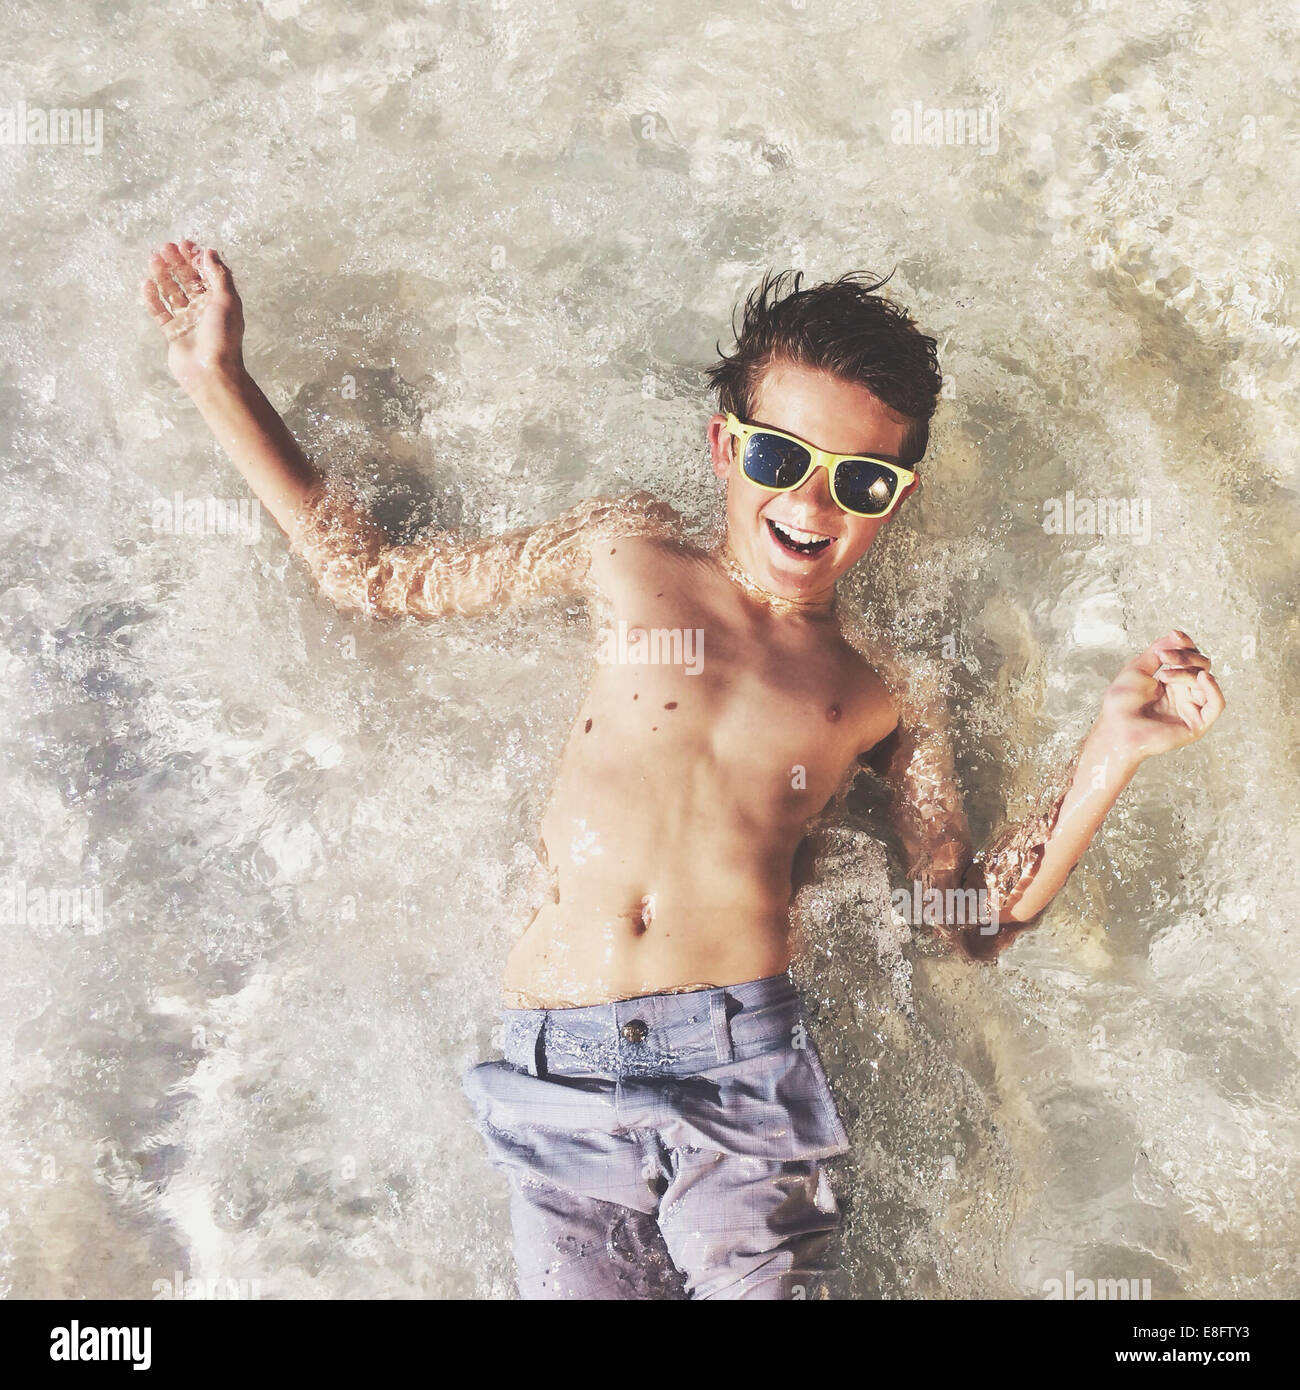 Overhead view of smiling Boy lying in shallow sea Stock Photo